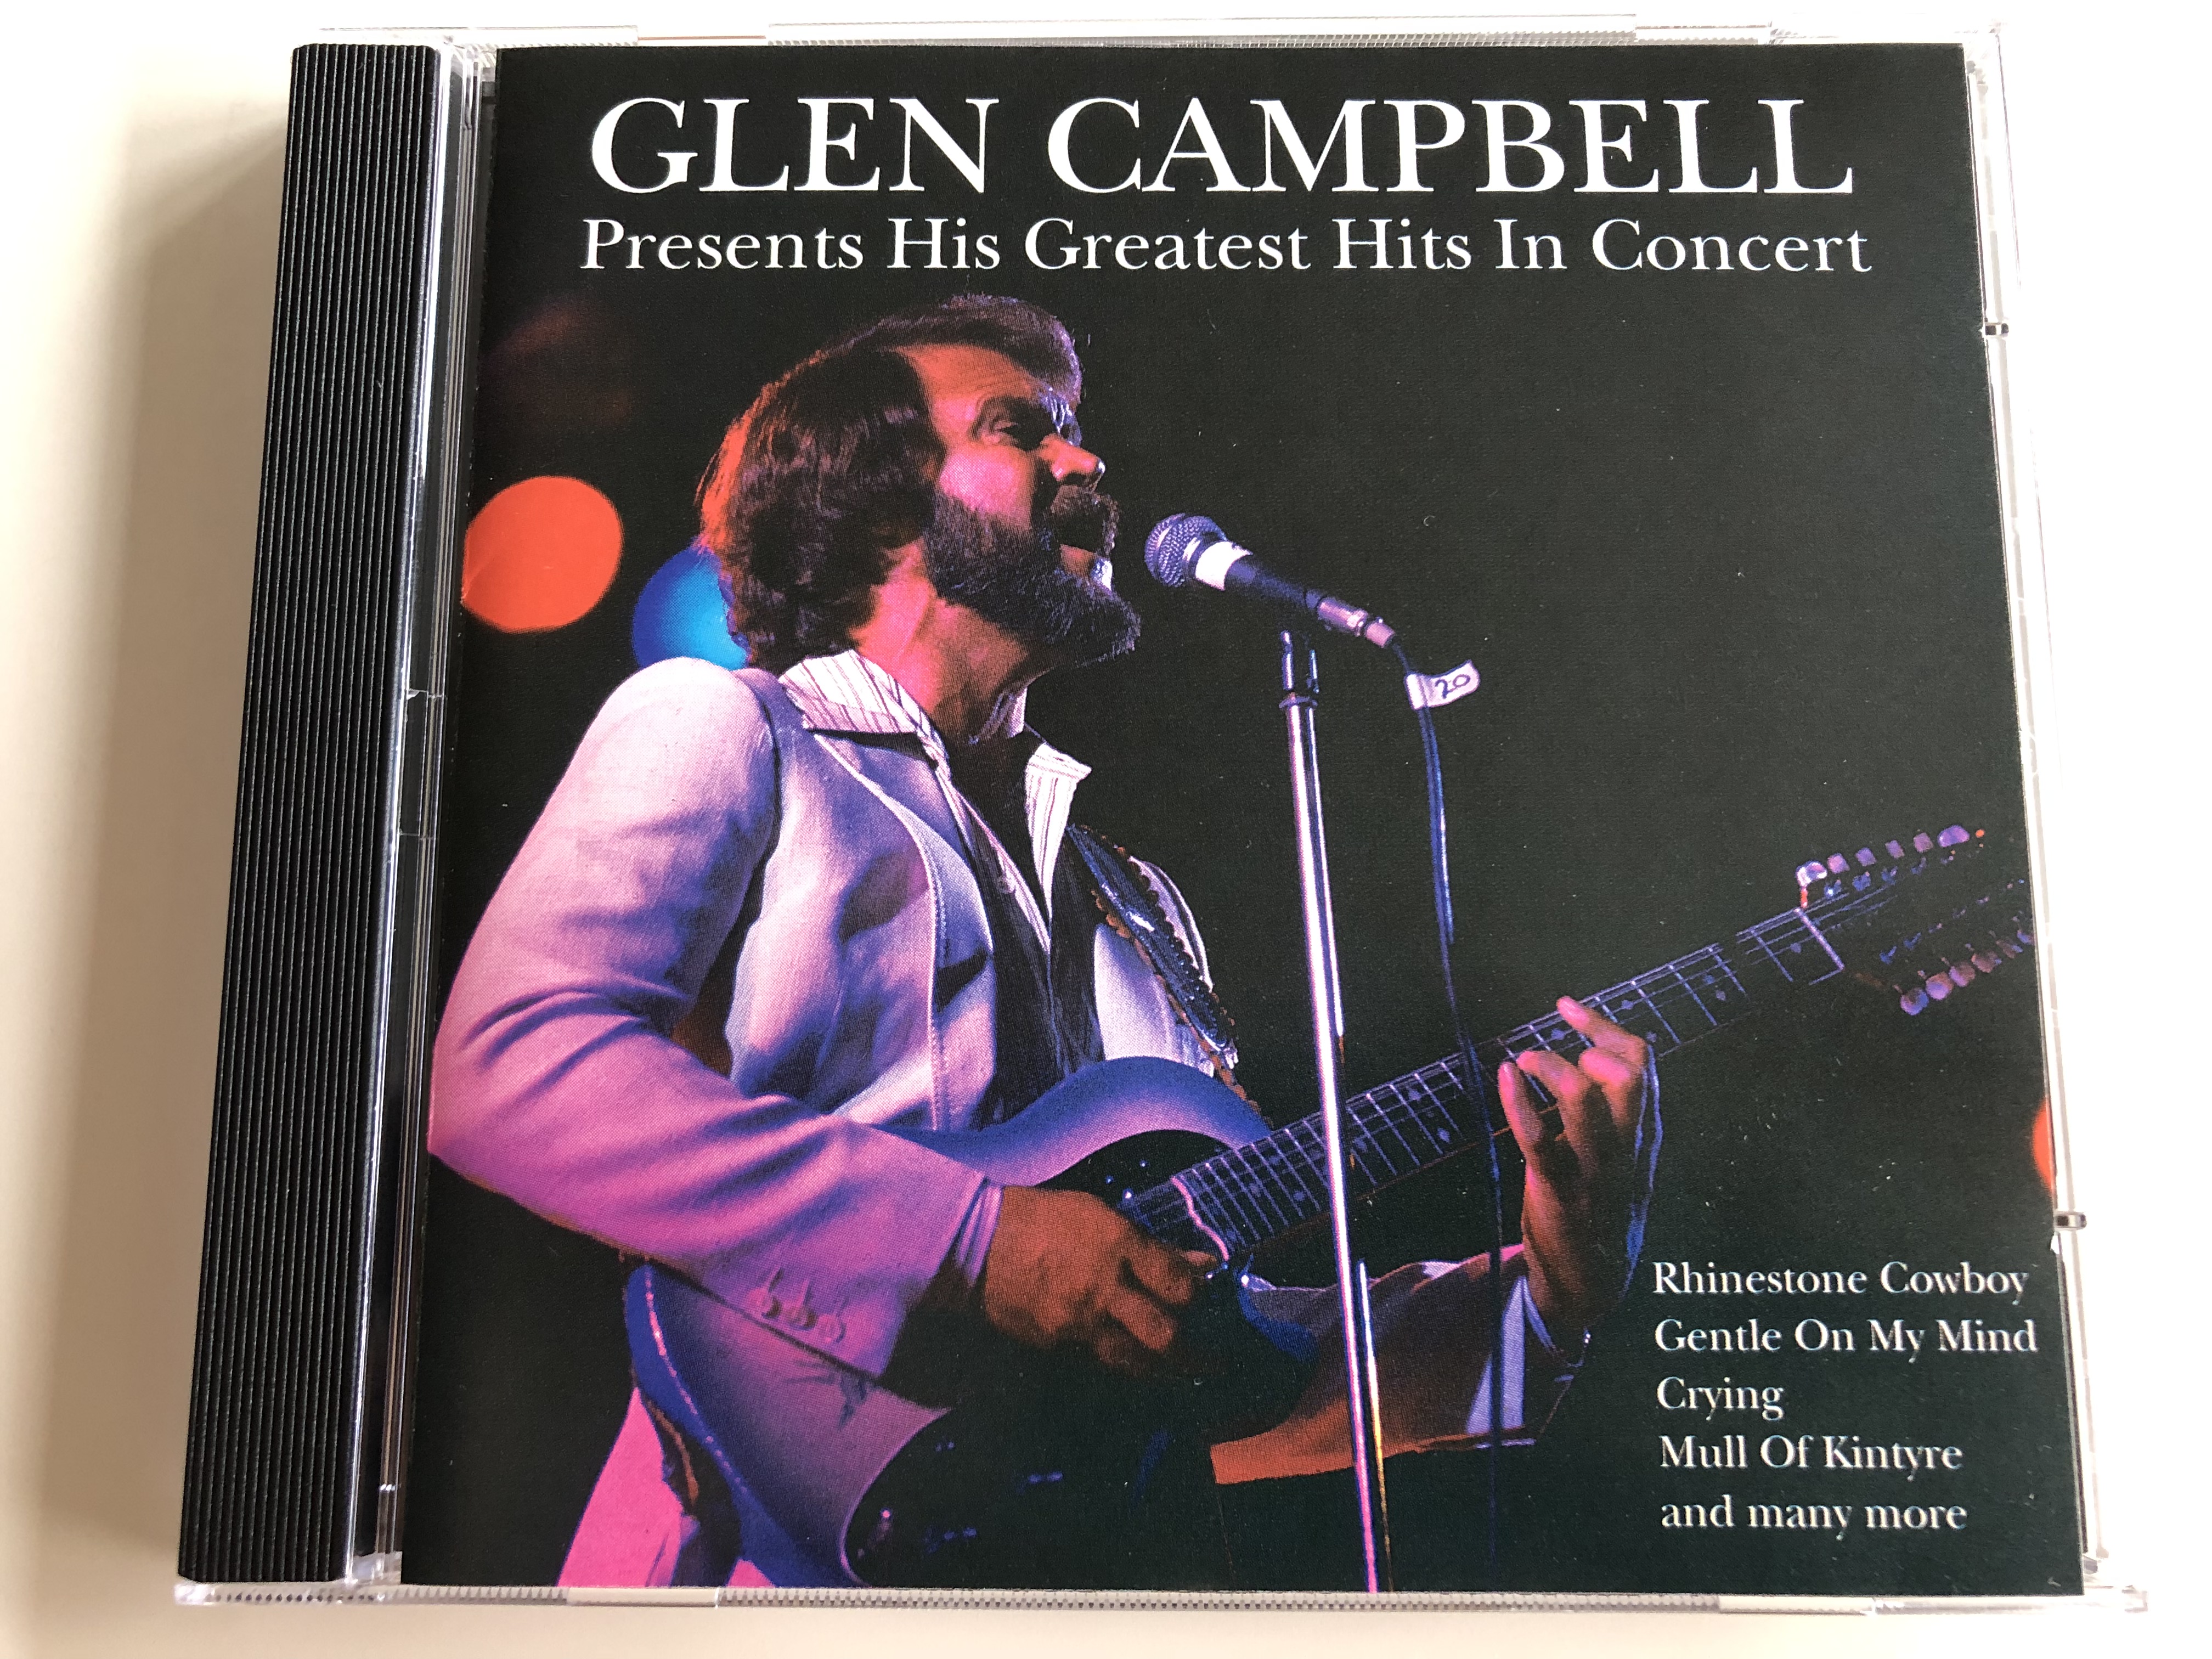 glen-campbell-presents-his-greatest-hits-in-concert-rhinestone-cowboy-gentle-on-my-mind-crying-mull-of-kintyre-and-many-more-audio-cd-1994-wise-001-1-.jpg